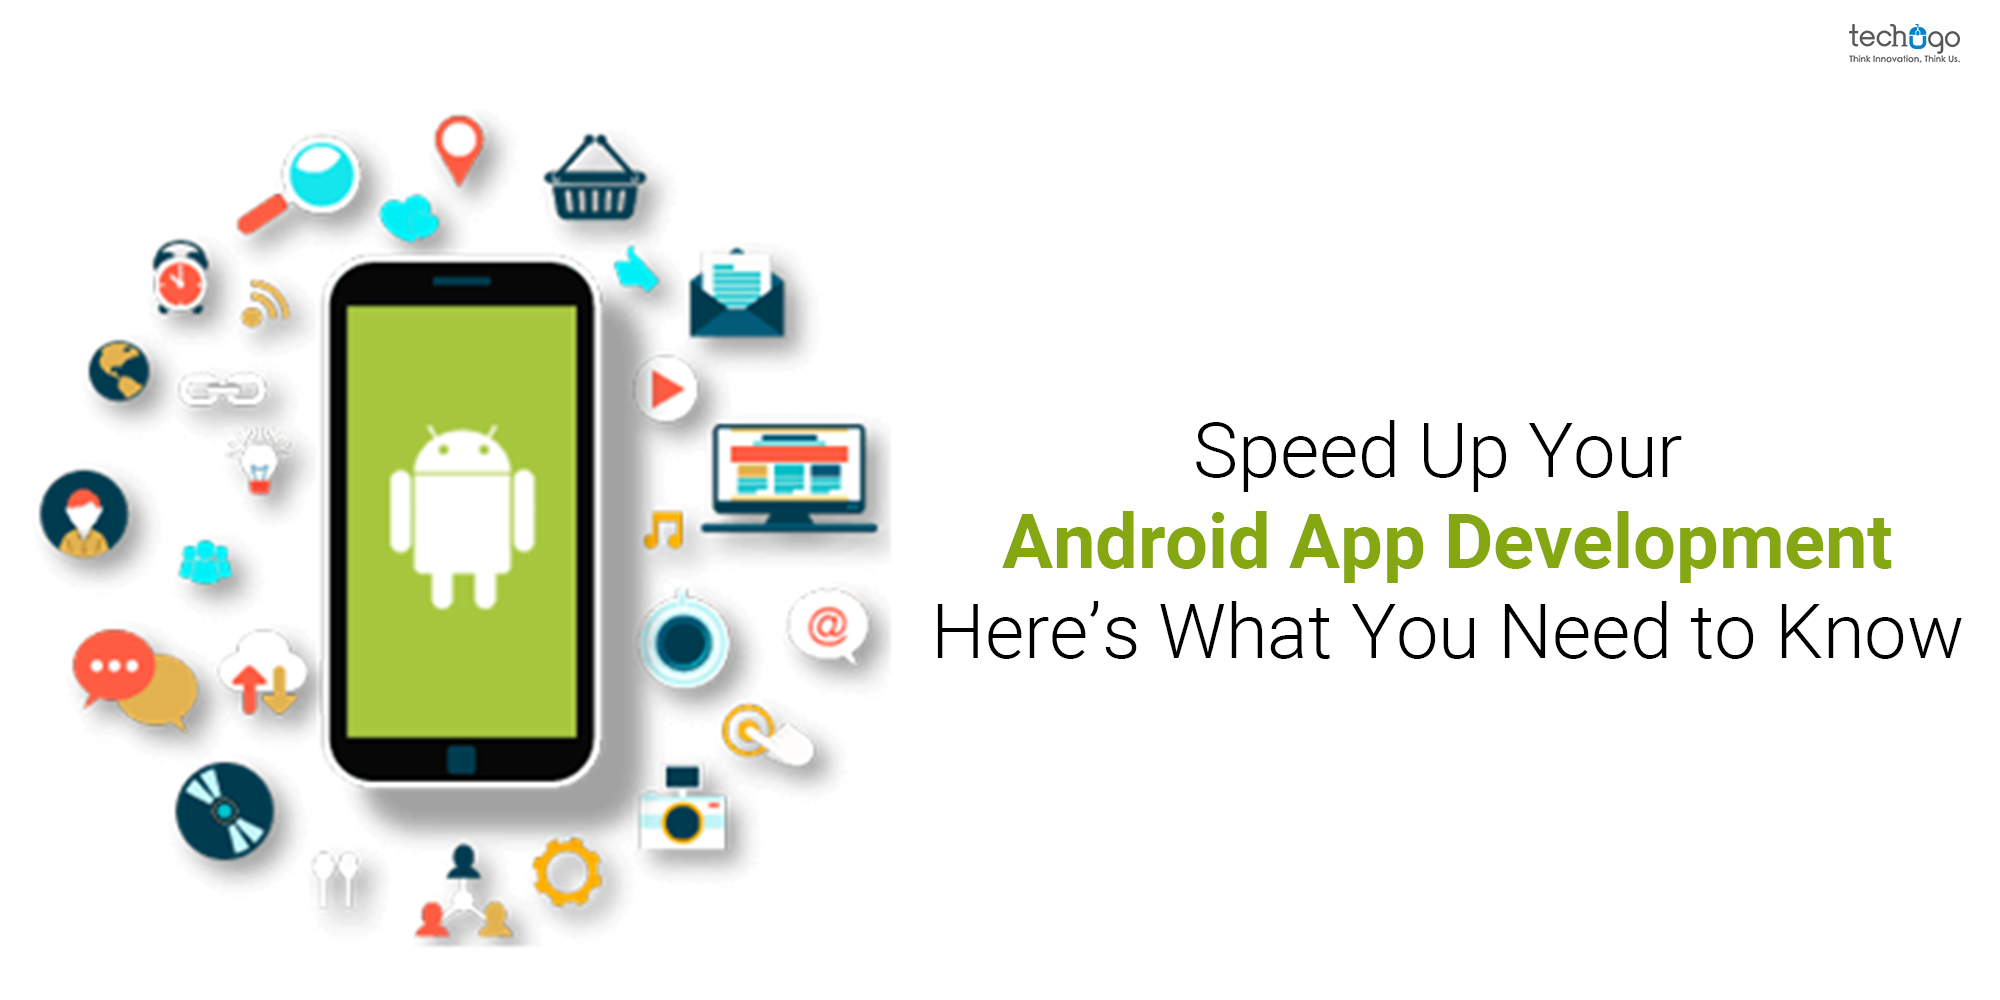 Speed Up Your Android App Development: Here’s What You Need to Know